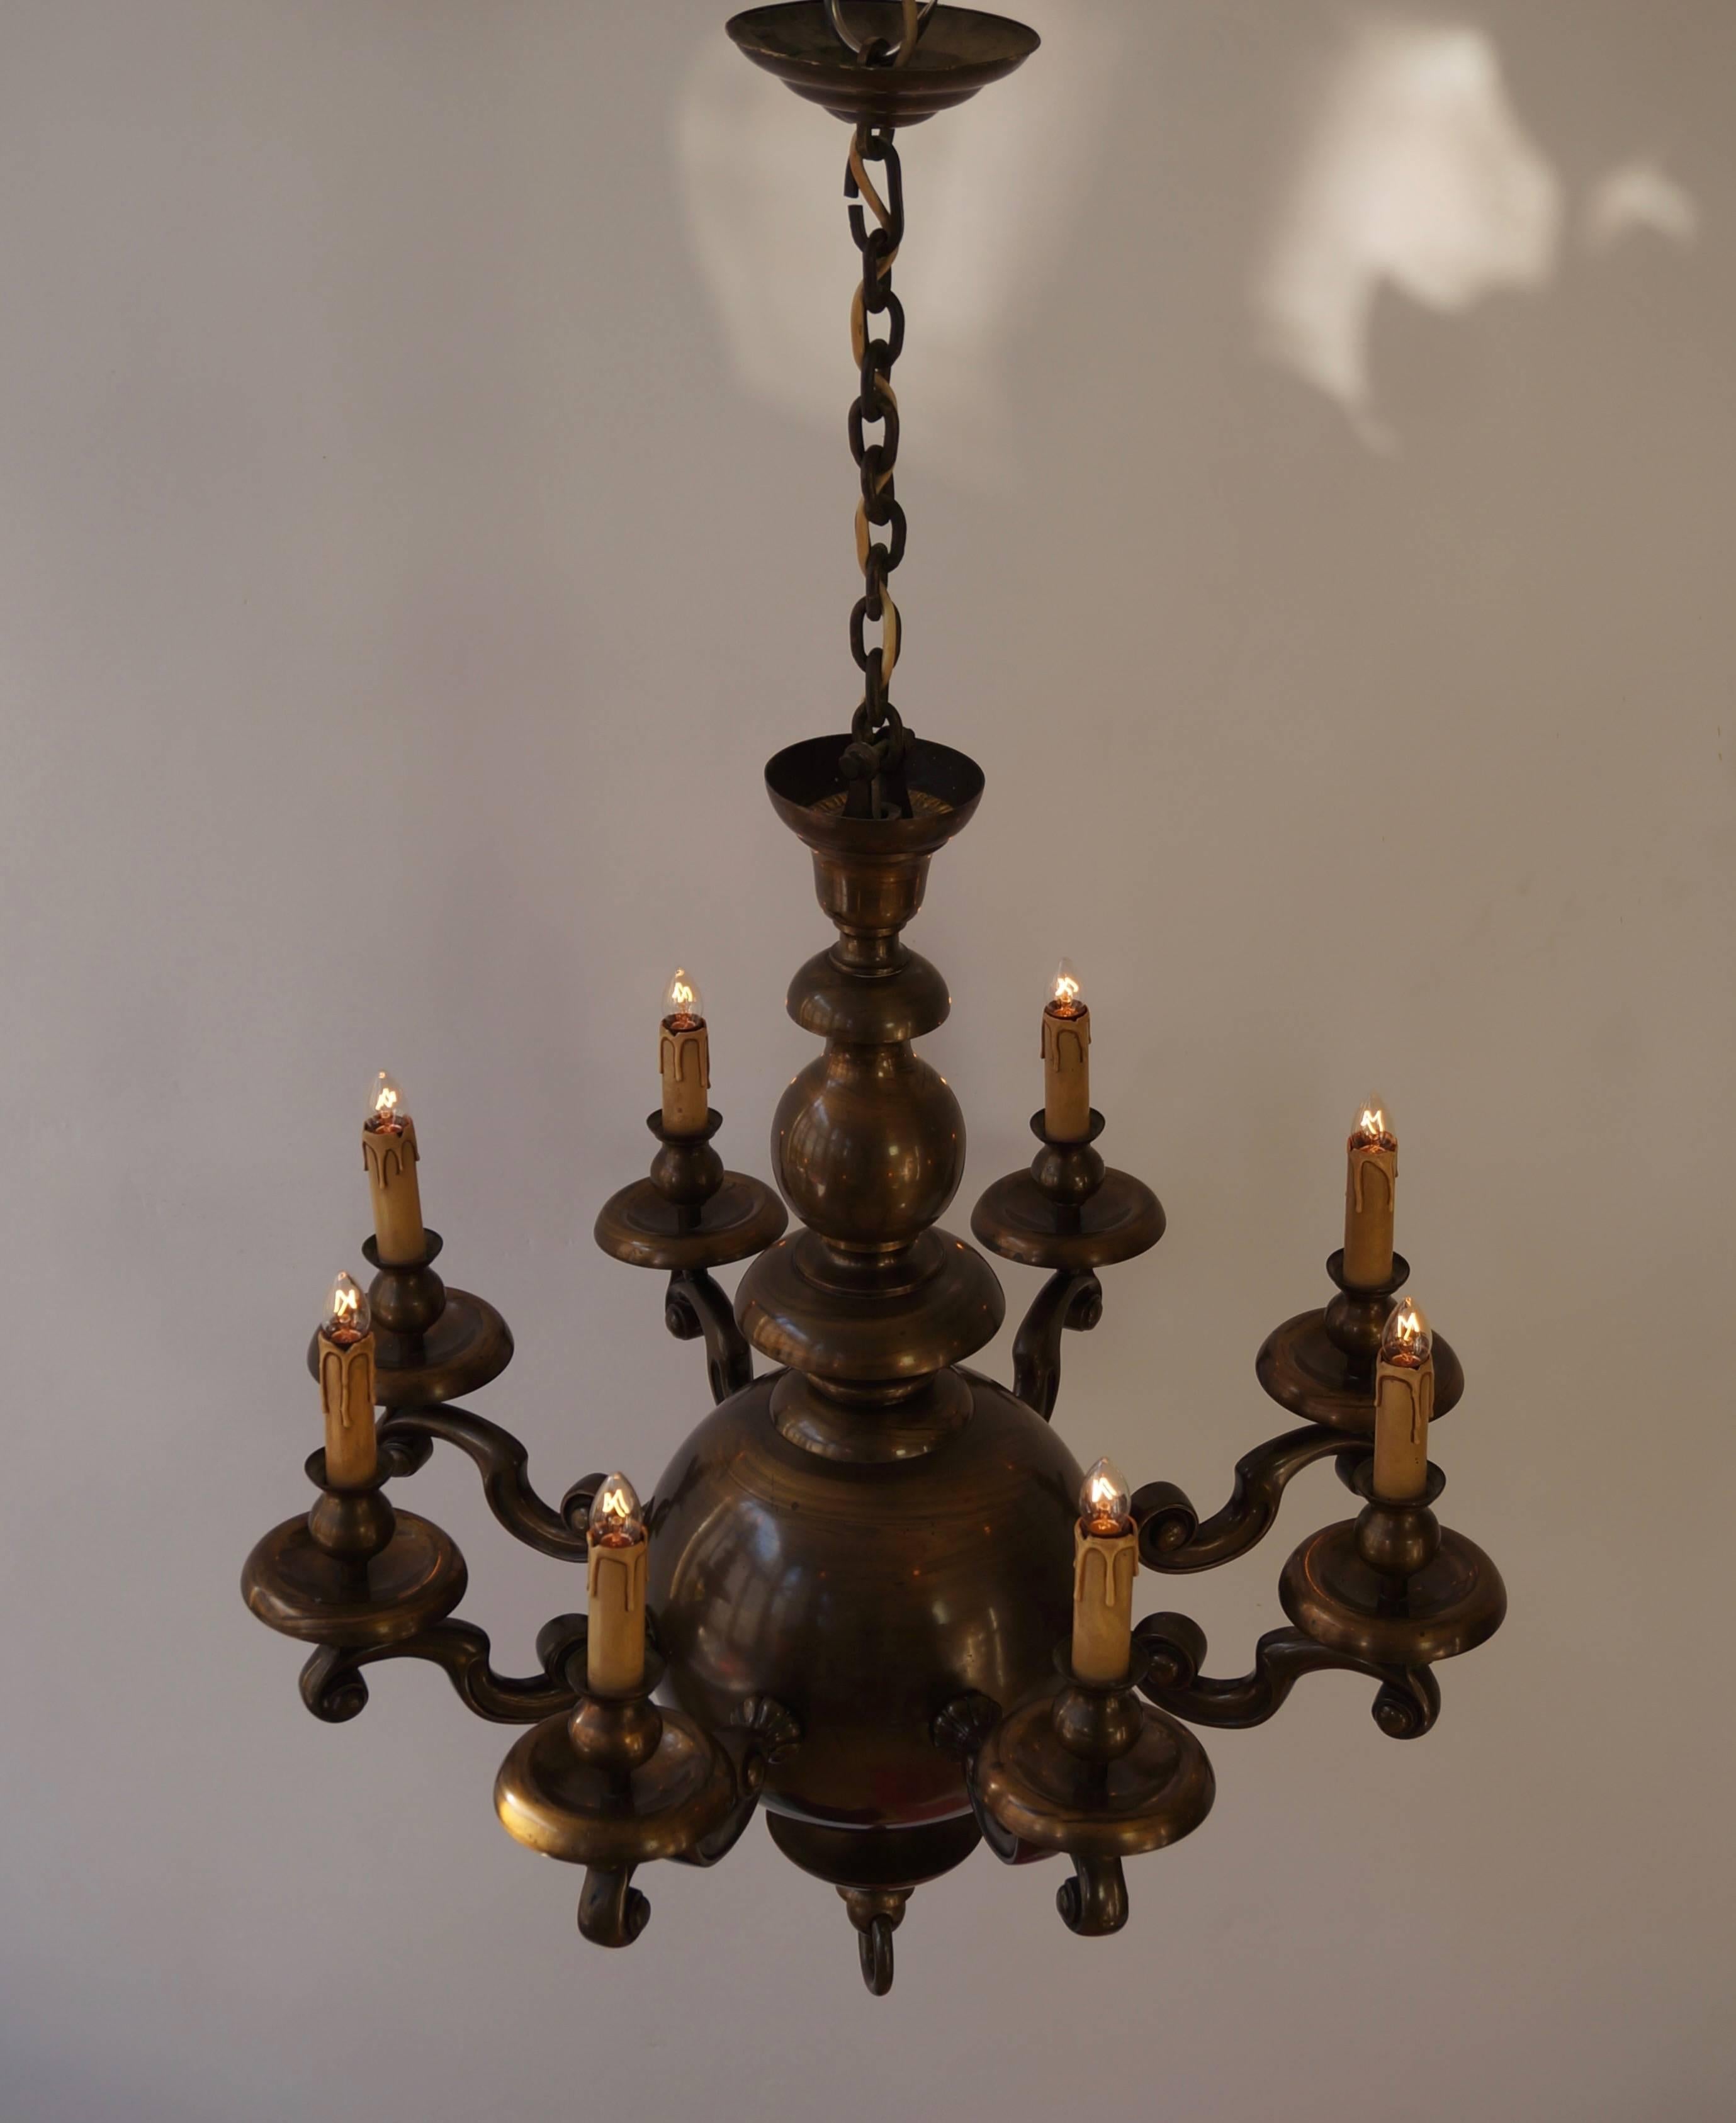 Massive bronze Flemish style chandelier with eight arms.
Eight E27 bulbs.
Total height with the chain is 100 cm.
Diameter: 66 cm.